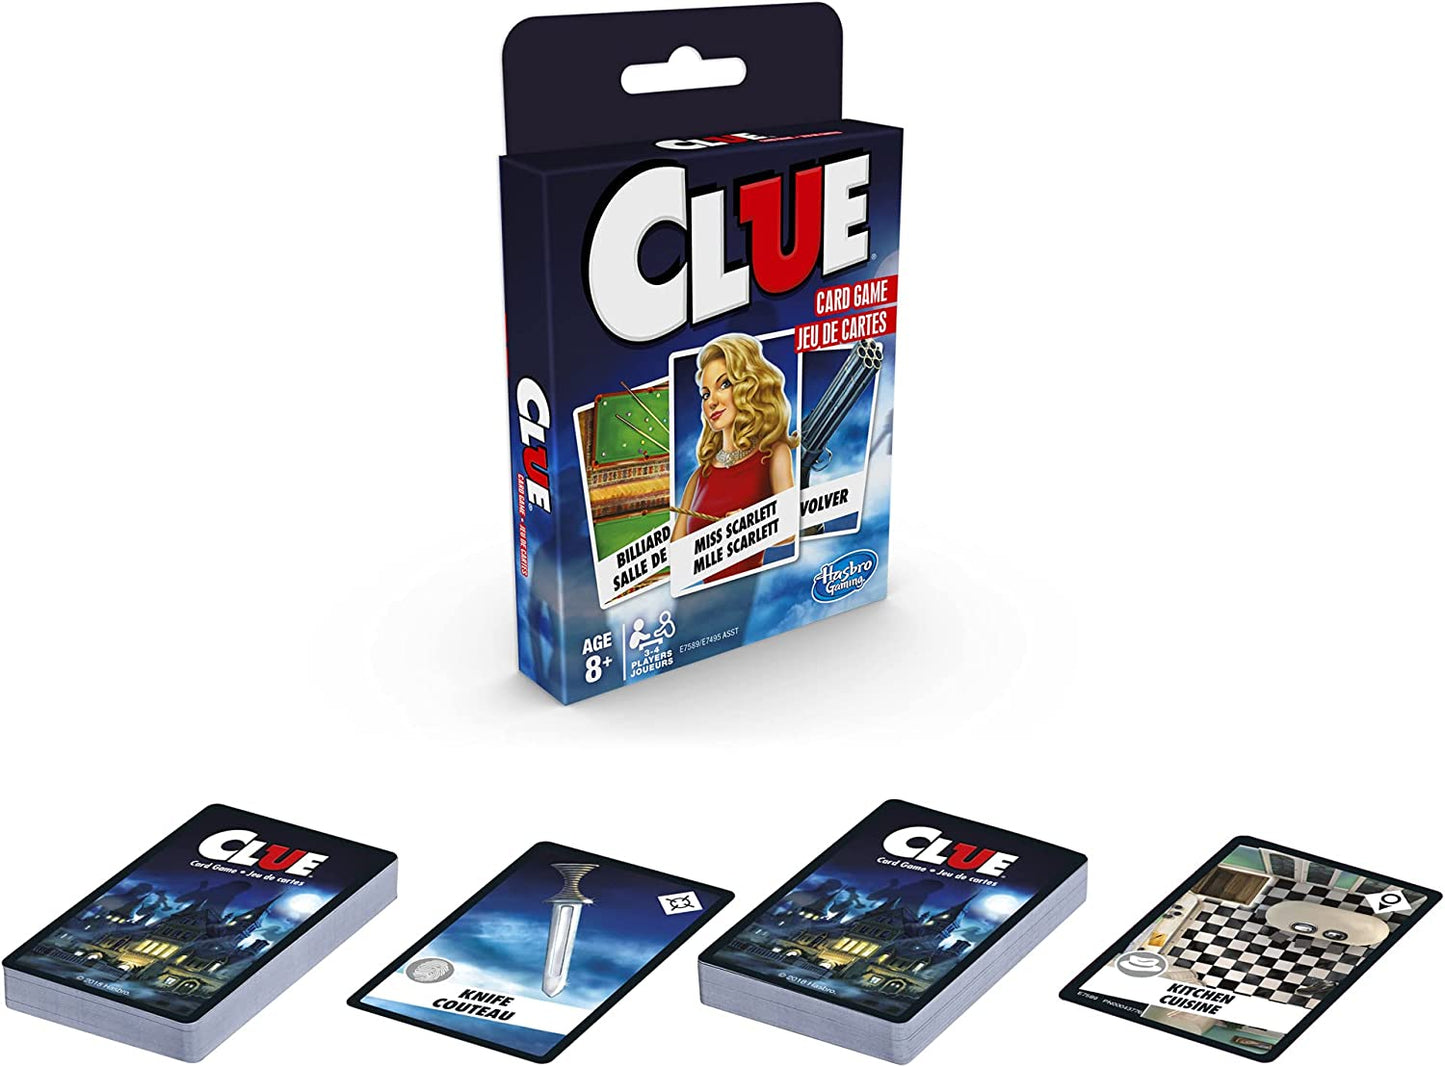 Hasbro Gaming Card Game for Kids & Family: Guess Who, Clue, Battleship, Connect 4 - Pick your favorite game